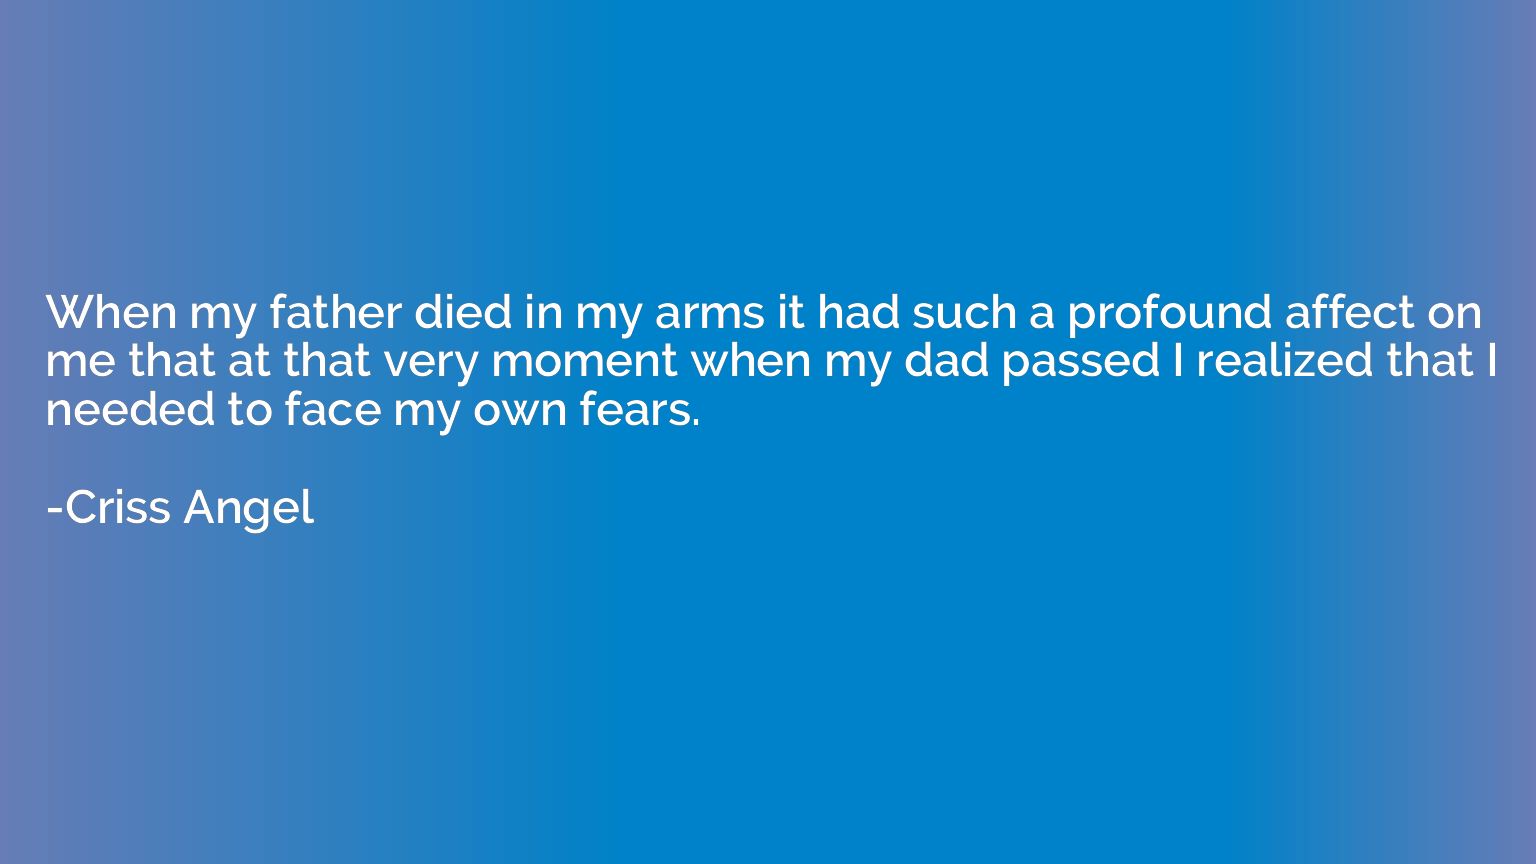 When my father died in my arms it had such a profound affect